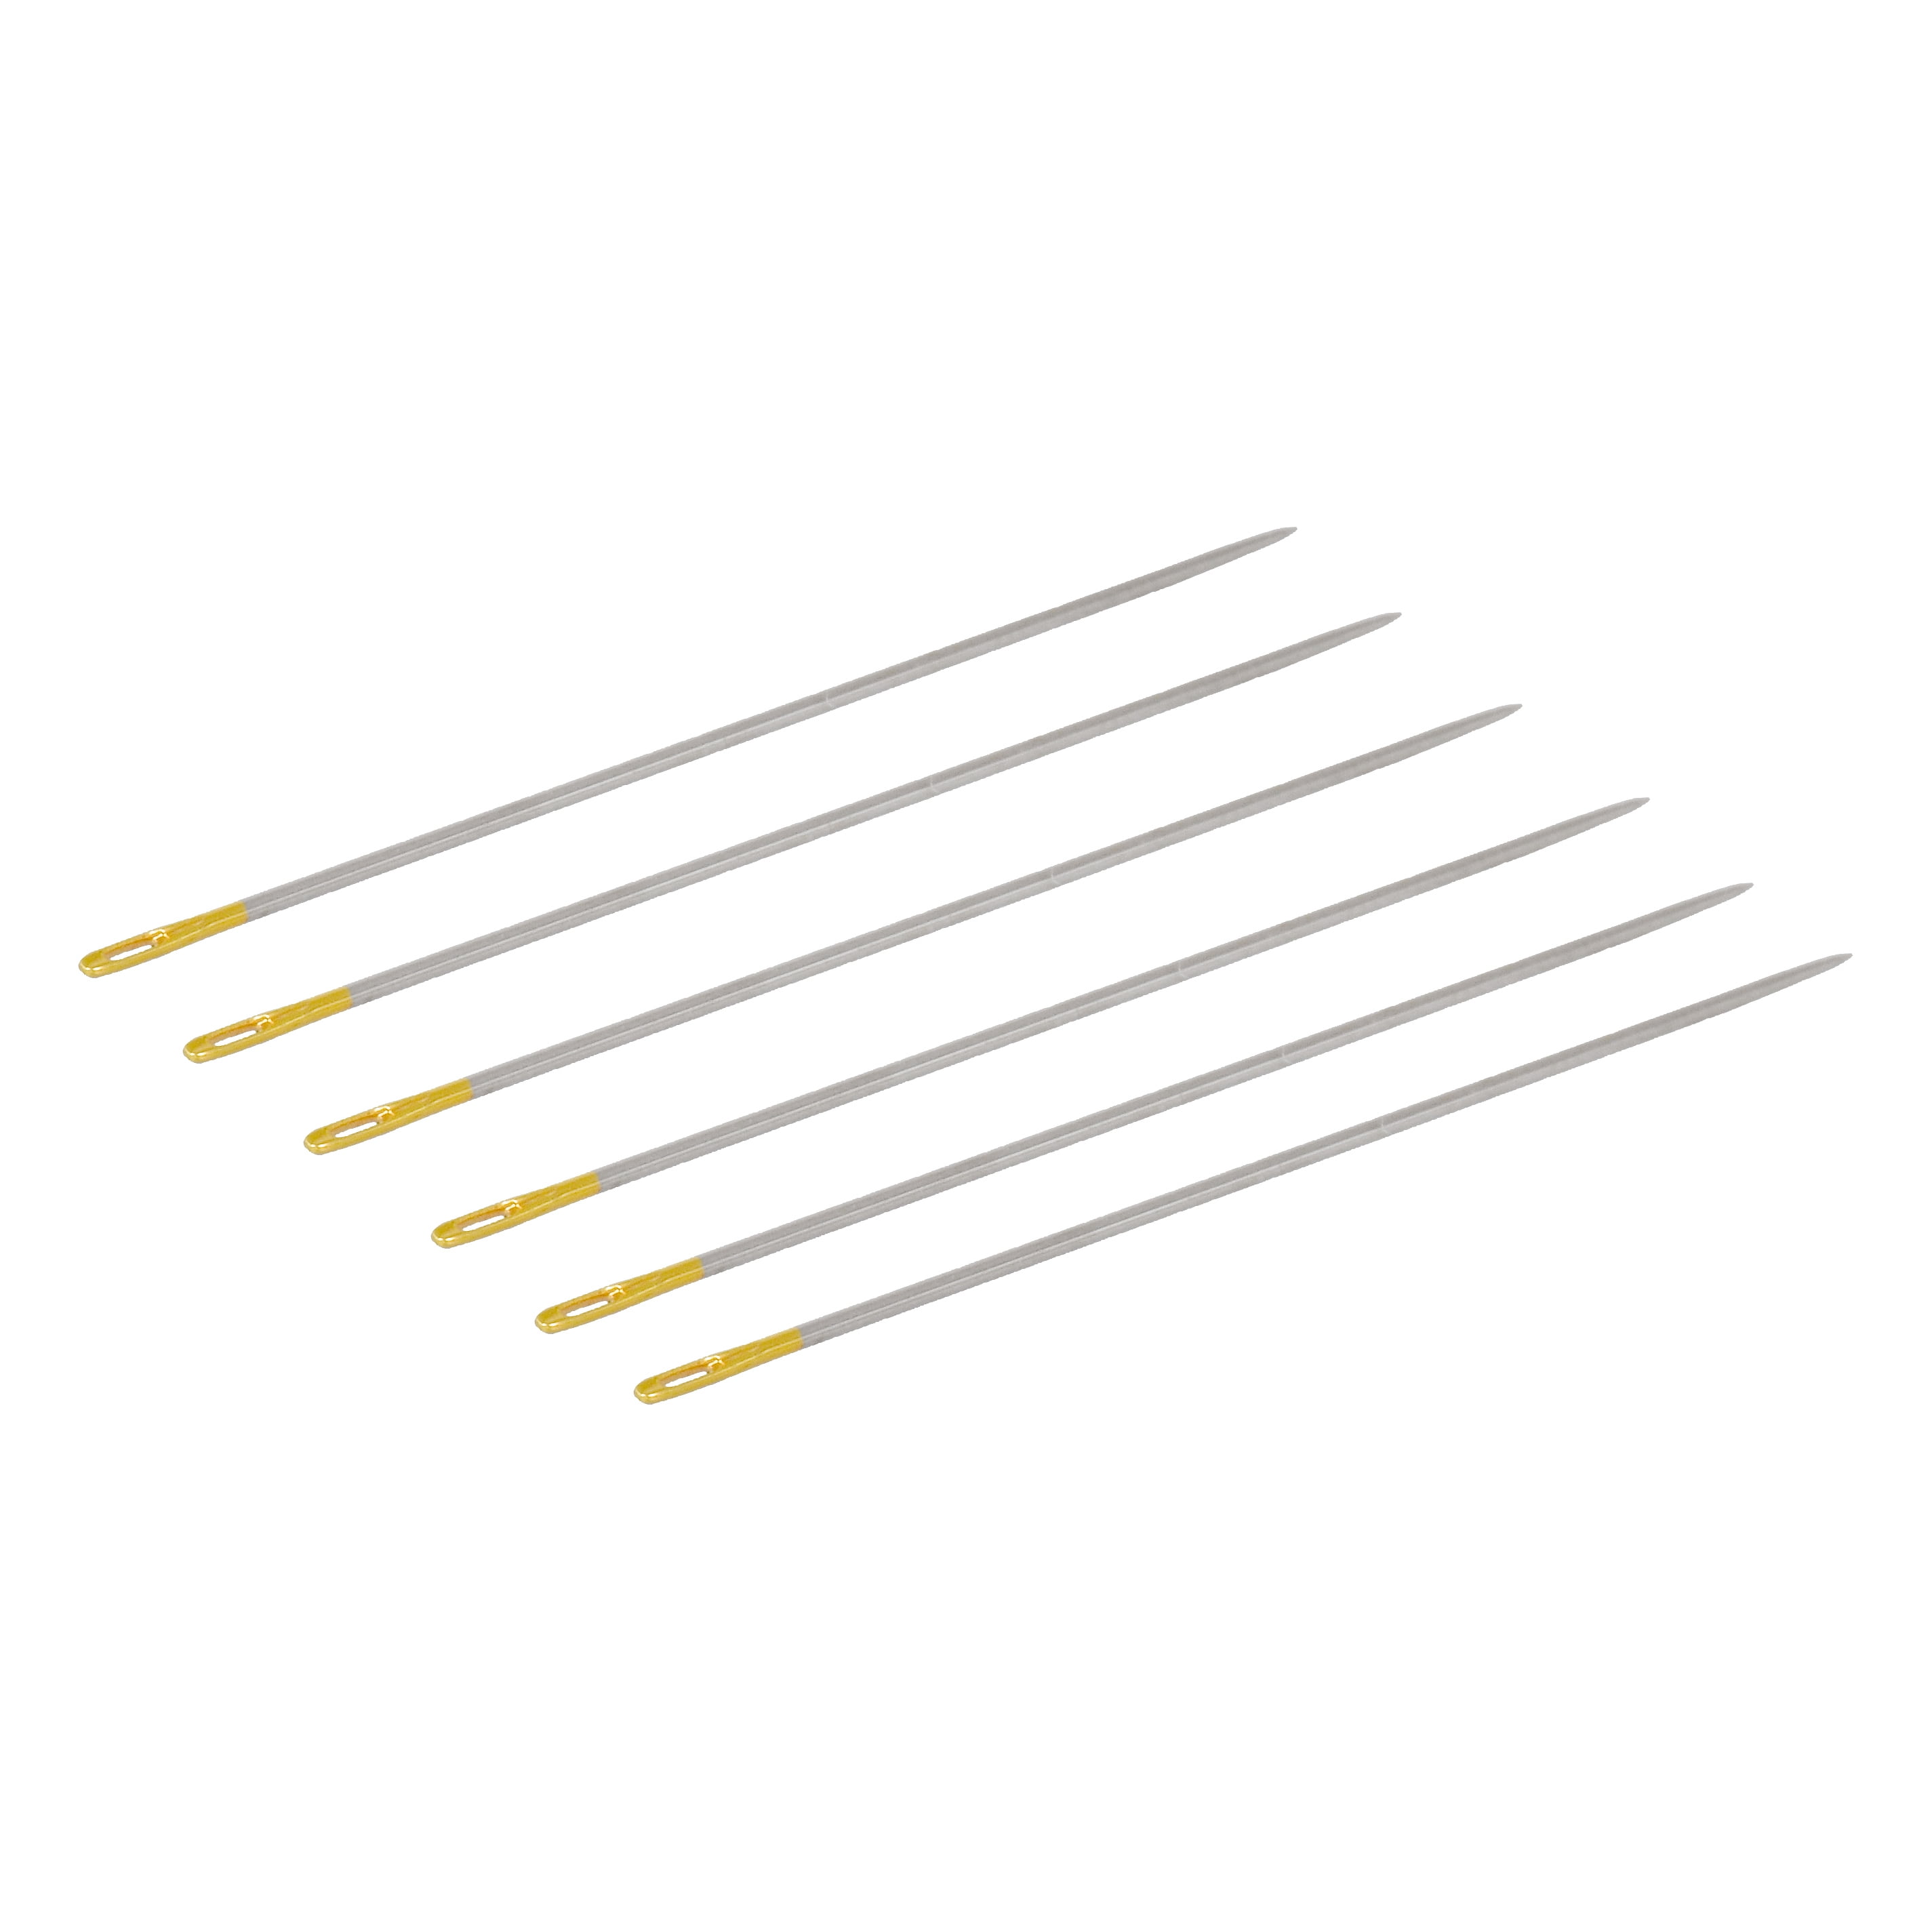 Beading Hand Sewing Needles - Wholesale Prices on Safety Pins by Strang  Advance